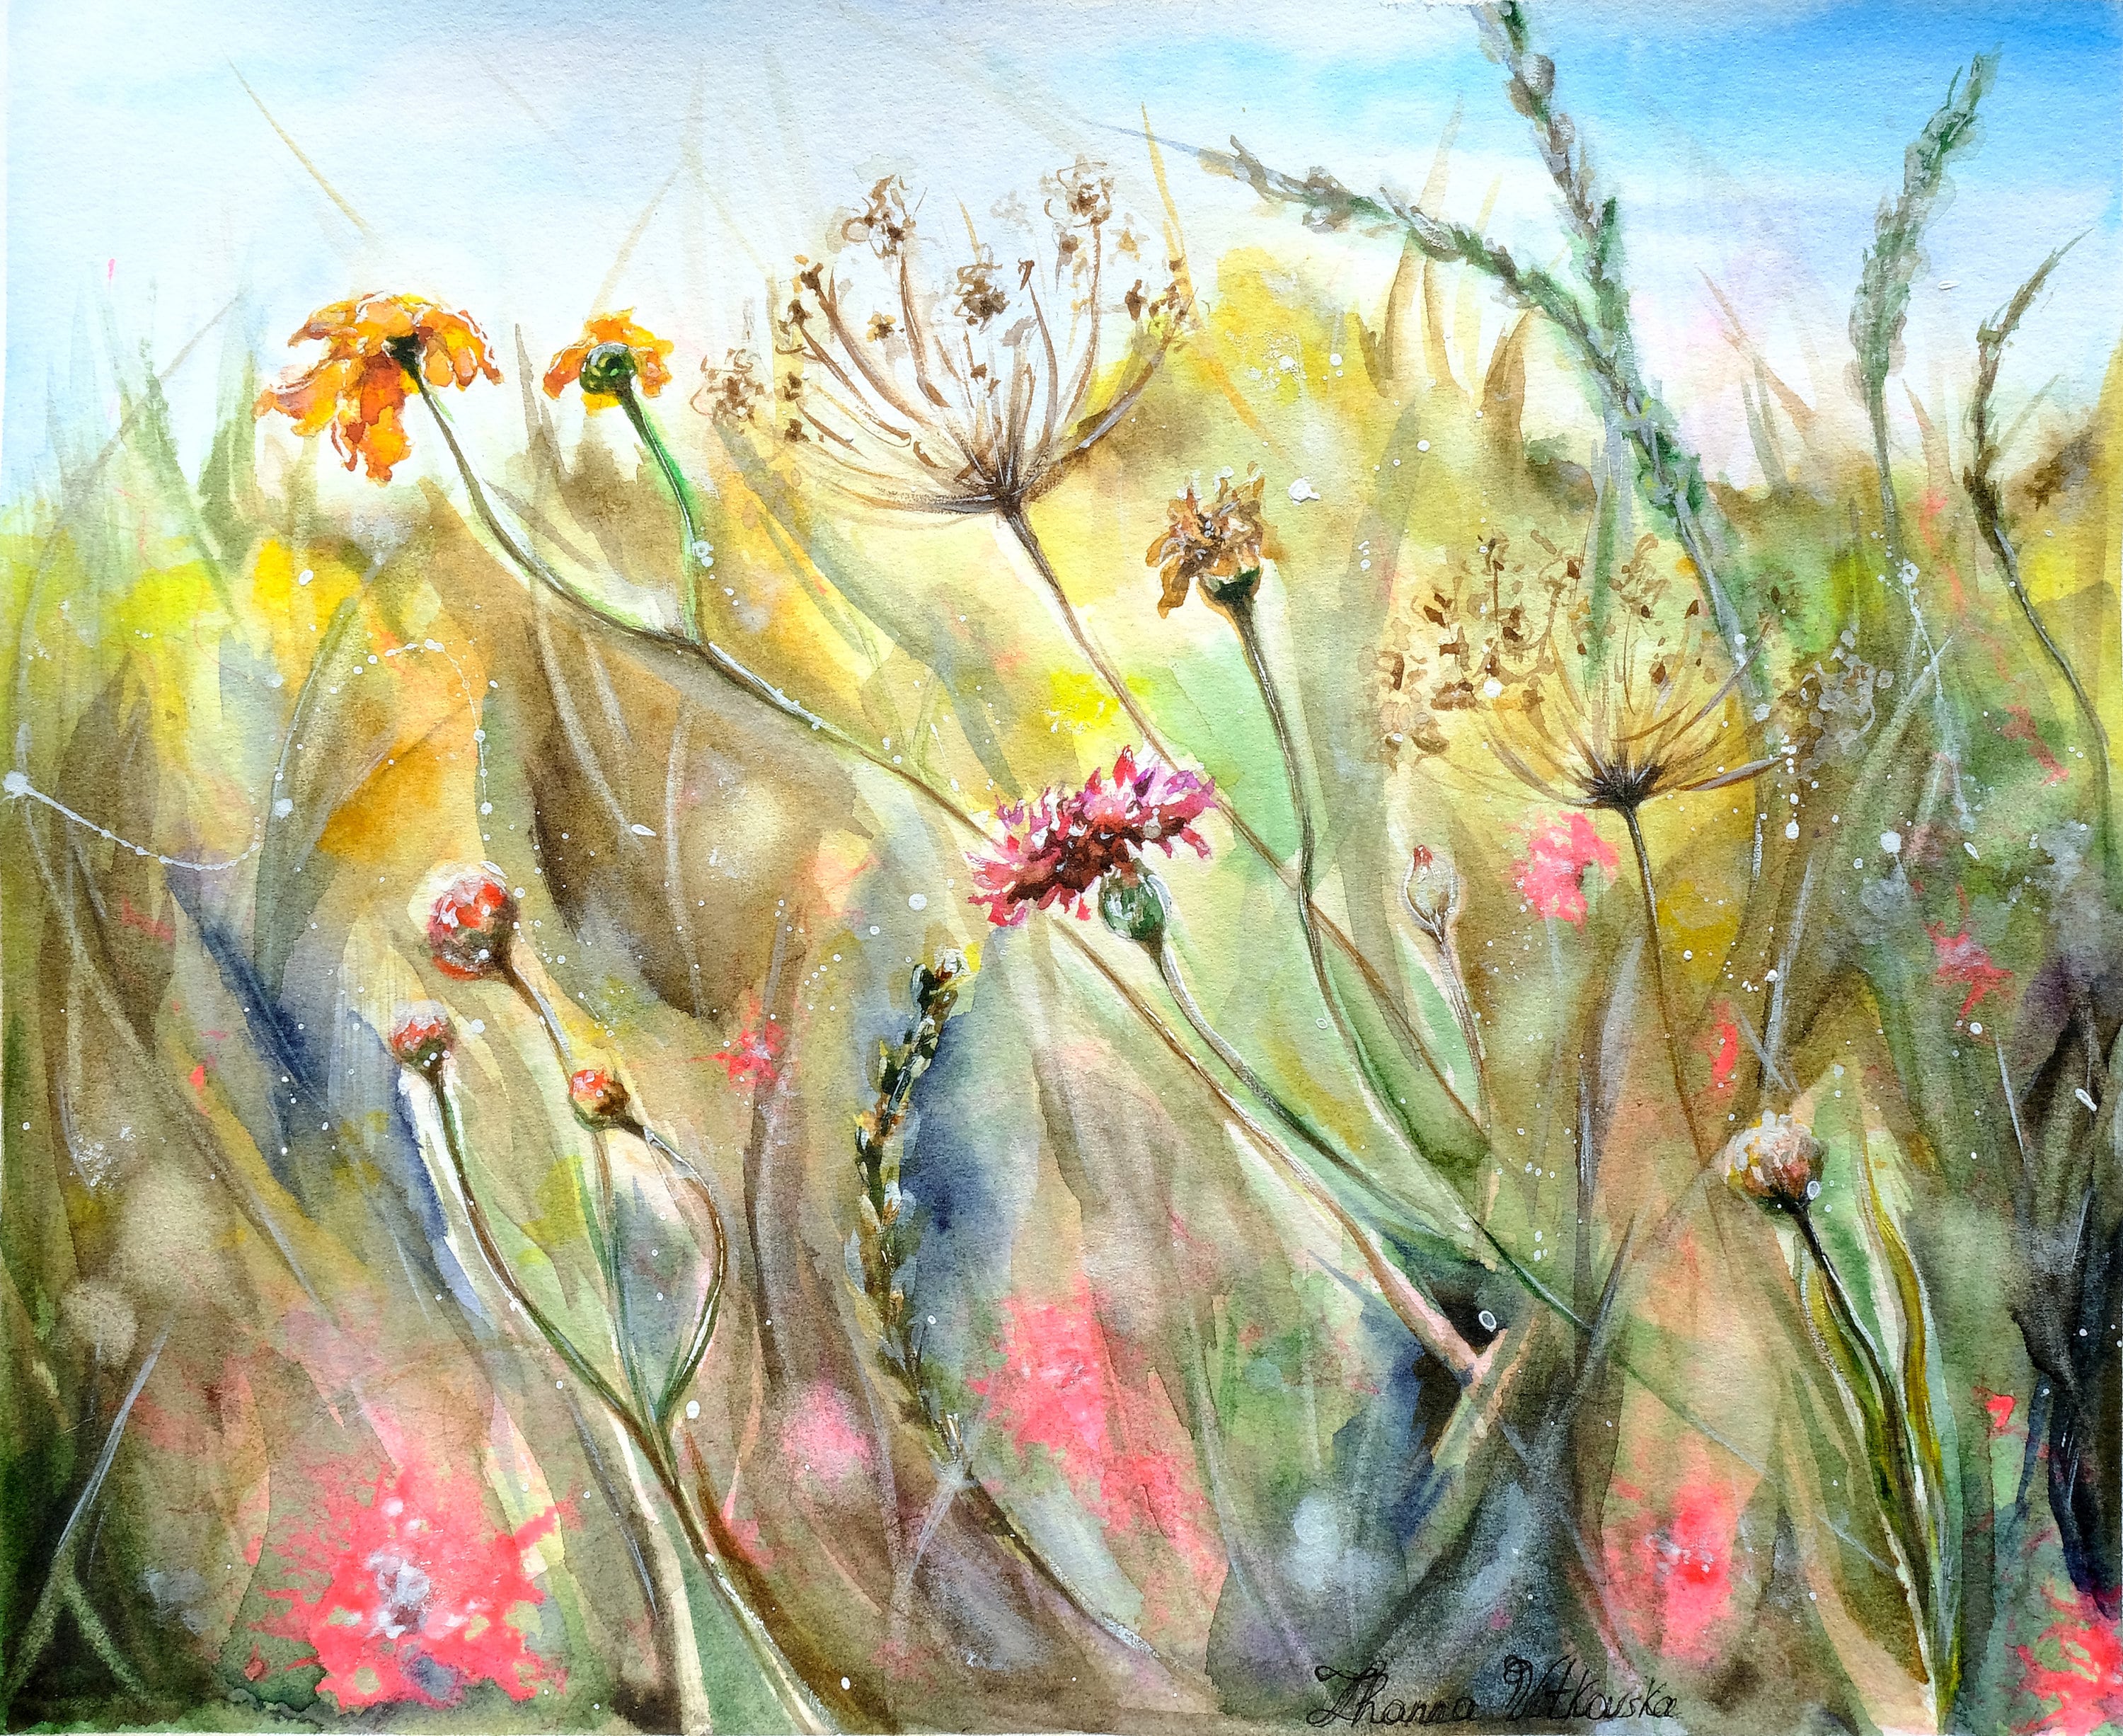 In A Field of Roses She is A Wildflower Watercolour Flower Print,  Wildflower Wall Art, Florals and Bees Watercolor Design, Nursery Art 